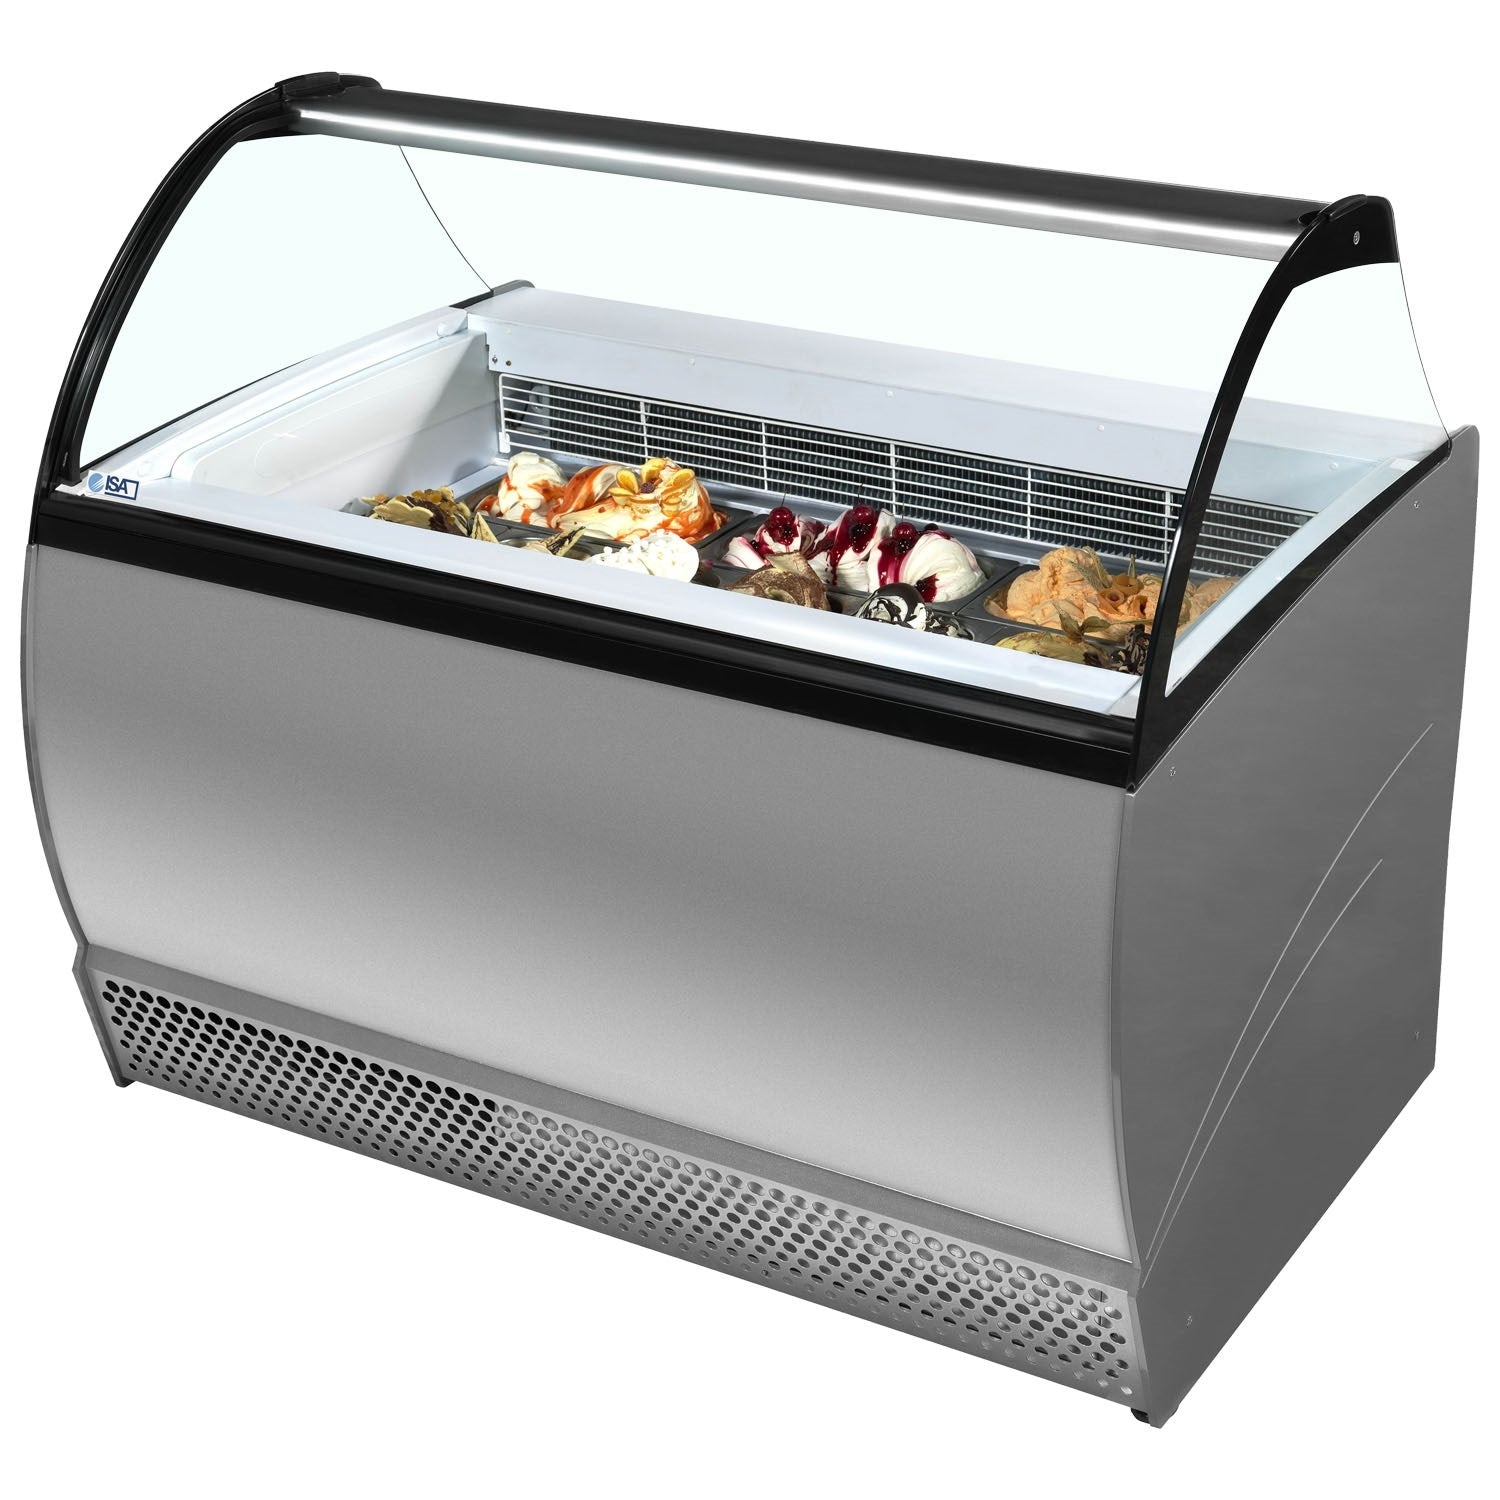 ISA ISABELLA 10LX Scoop Ice Cream Display Grey 1317mm wide.Product ref:00413.MODEL:ISABELLA 10LX Grey.🚚 3-5 Days Delivery